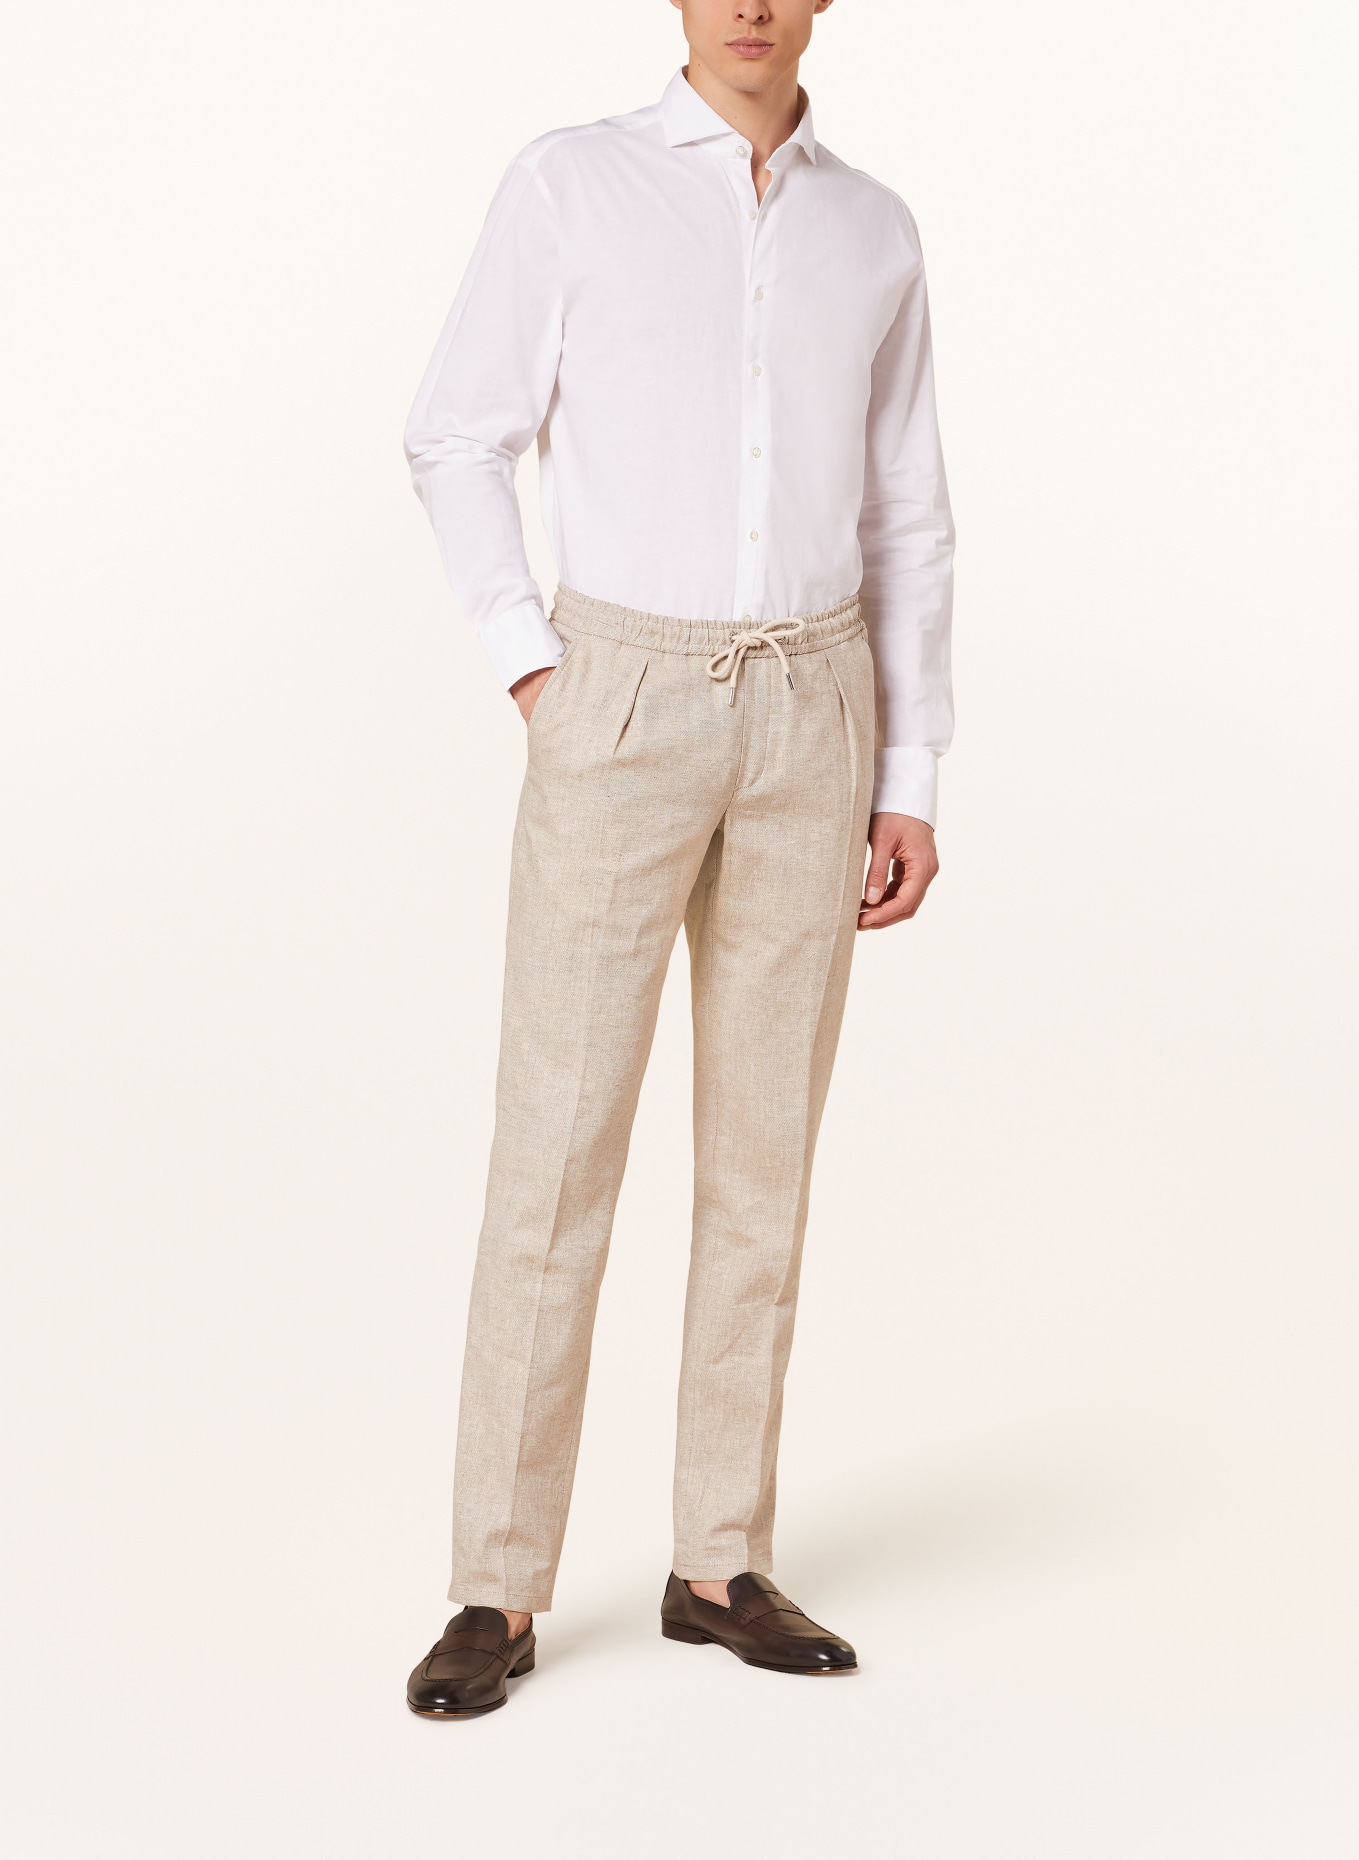 STROKESMAN'S Shirt regular fit with linen, Color: WHITE (Image 2)